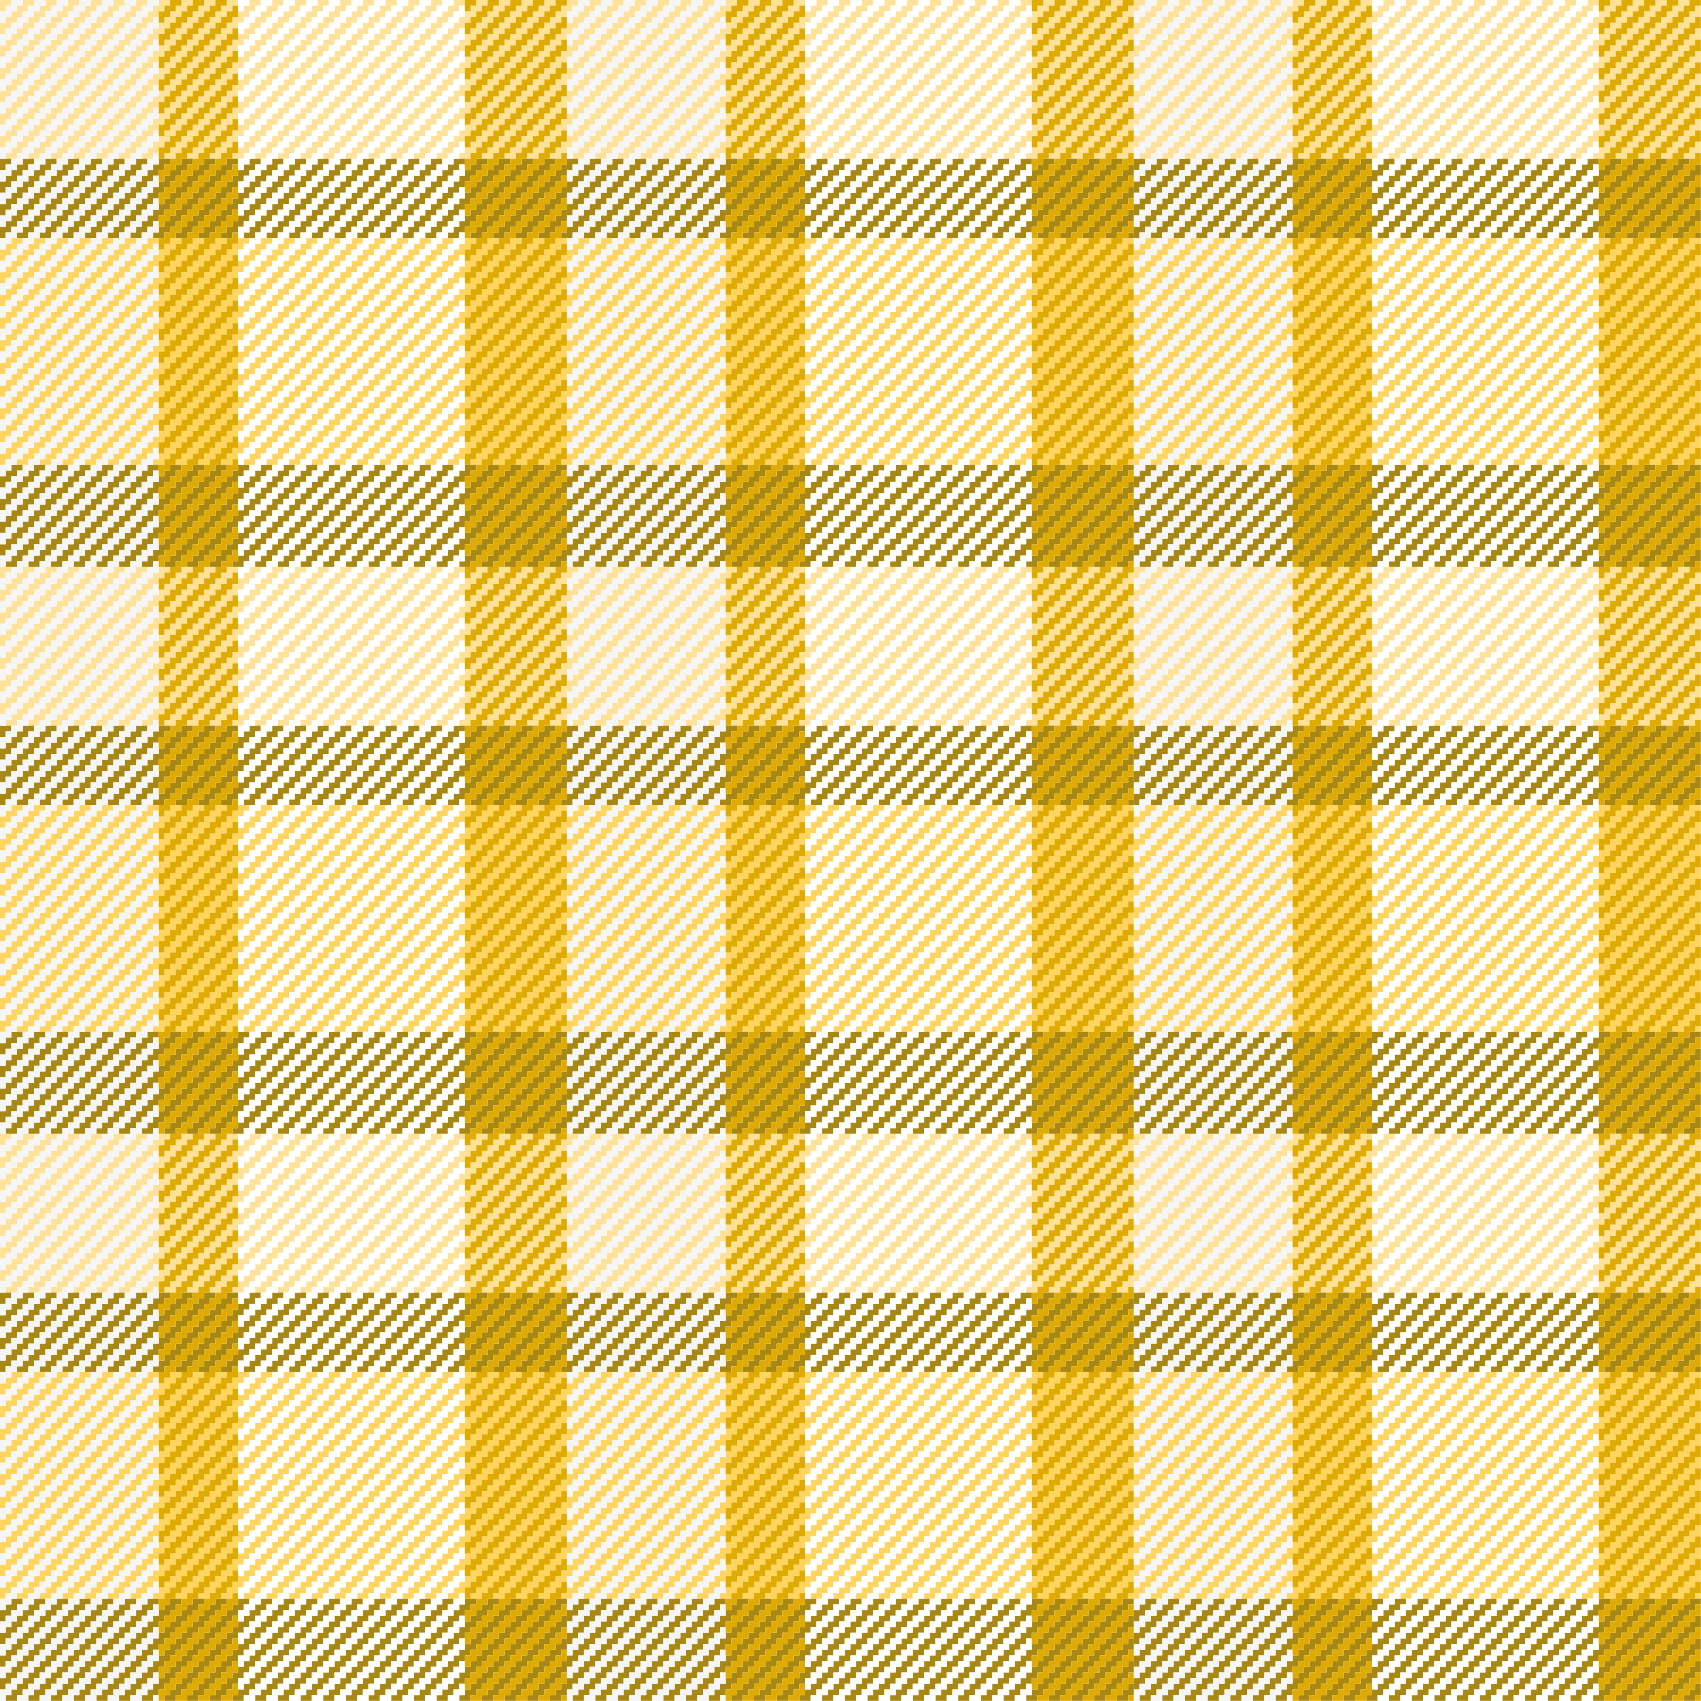 Yellow and white plaid pattern square rug - TenStickers